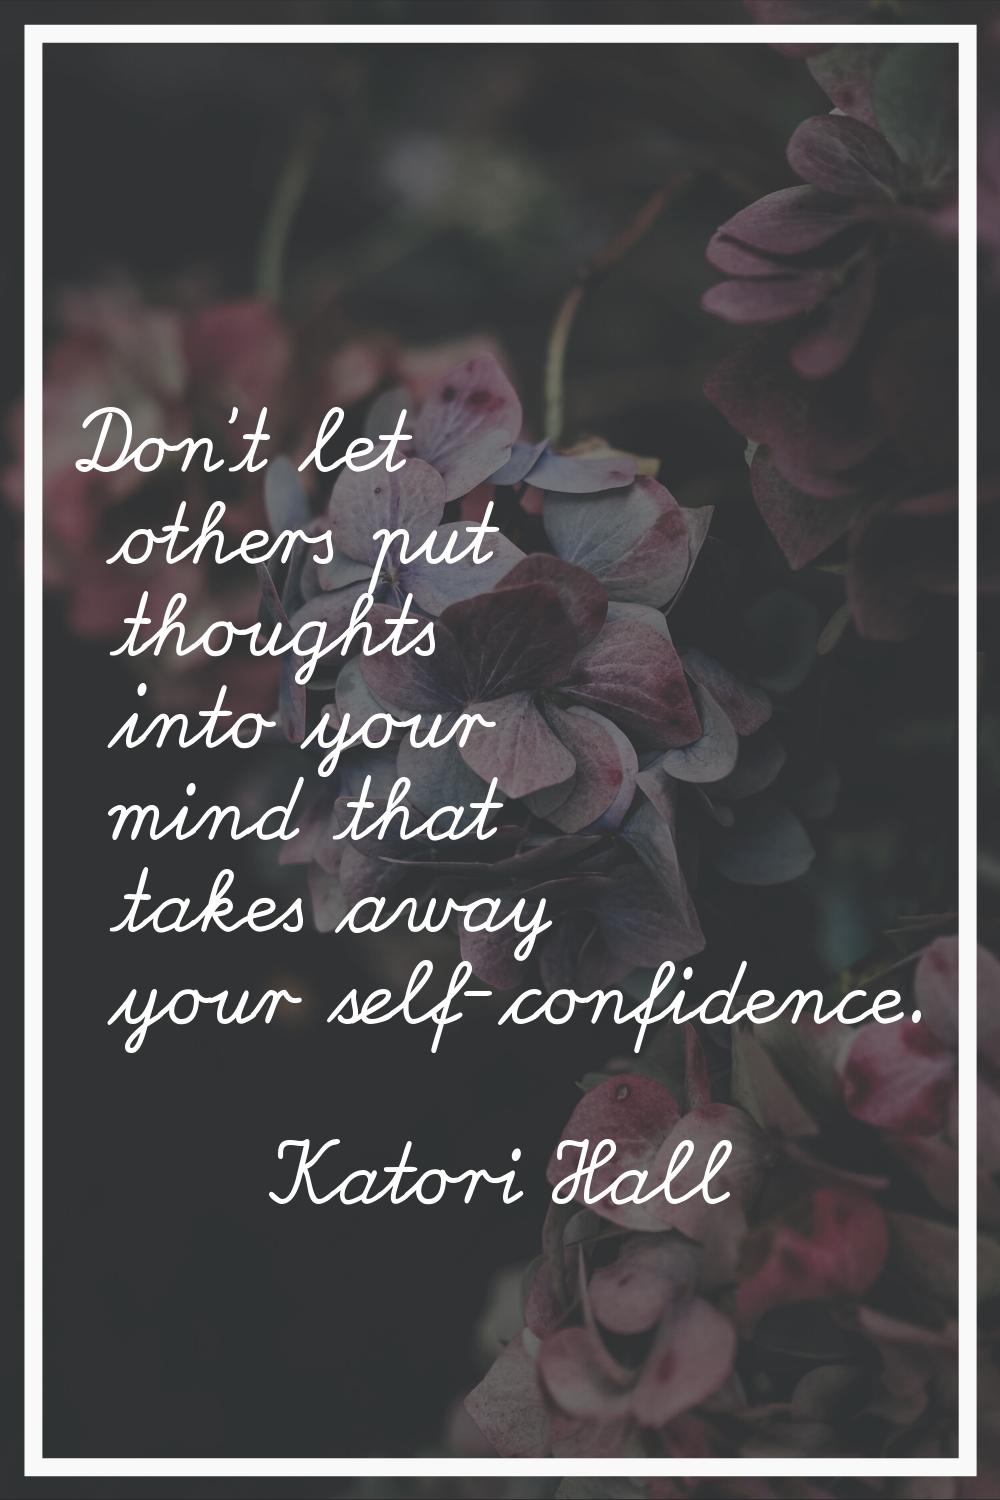 Don't let others put thoughts into your mind that takes away your self-confidence.